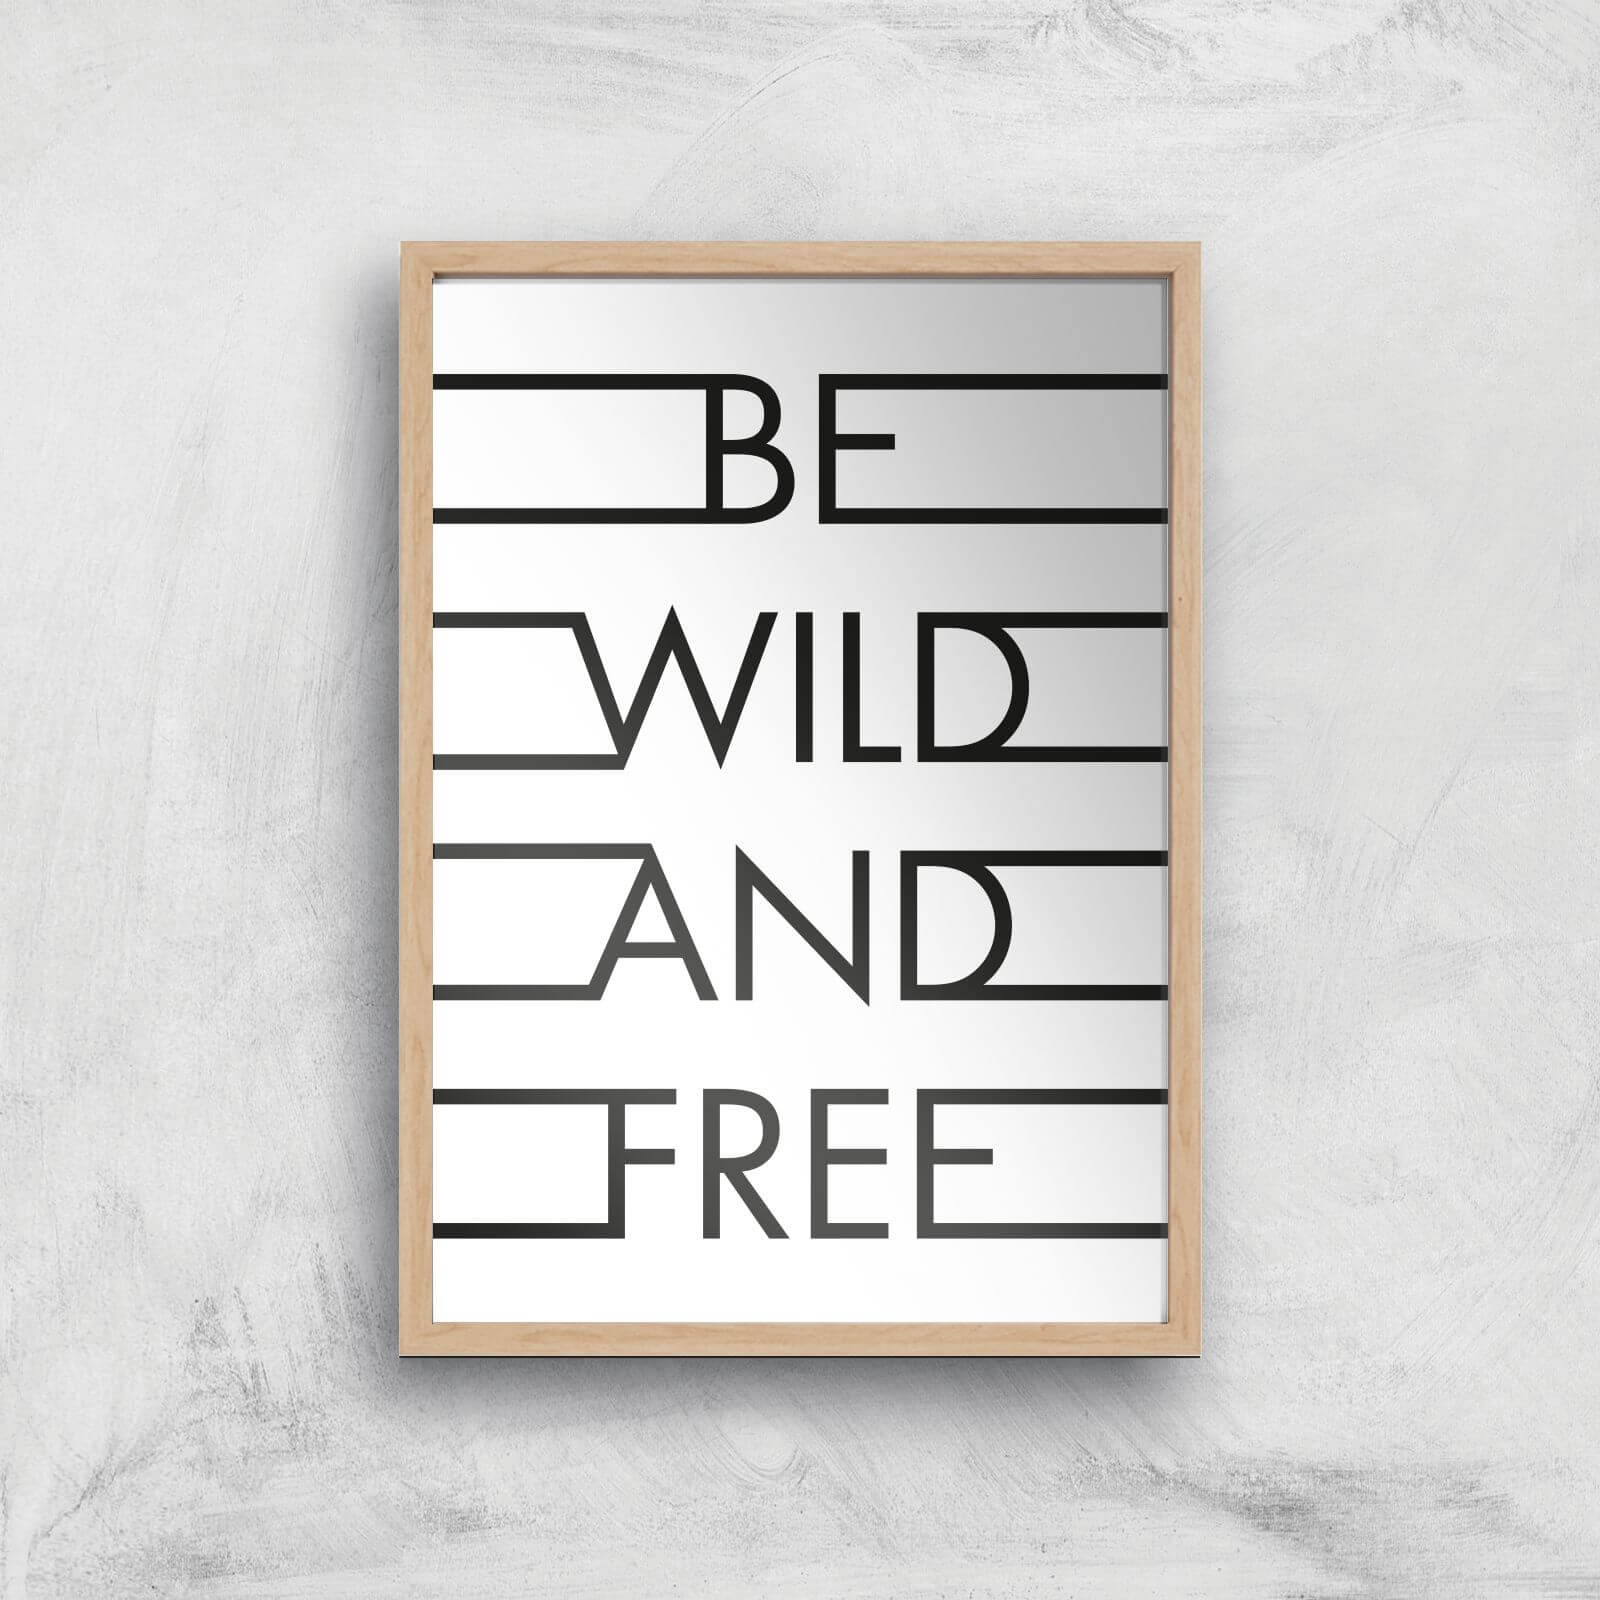 Be Wild & Free Giclee Art Print - A3 - Wooden Frame